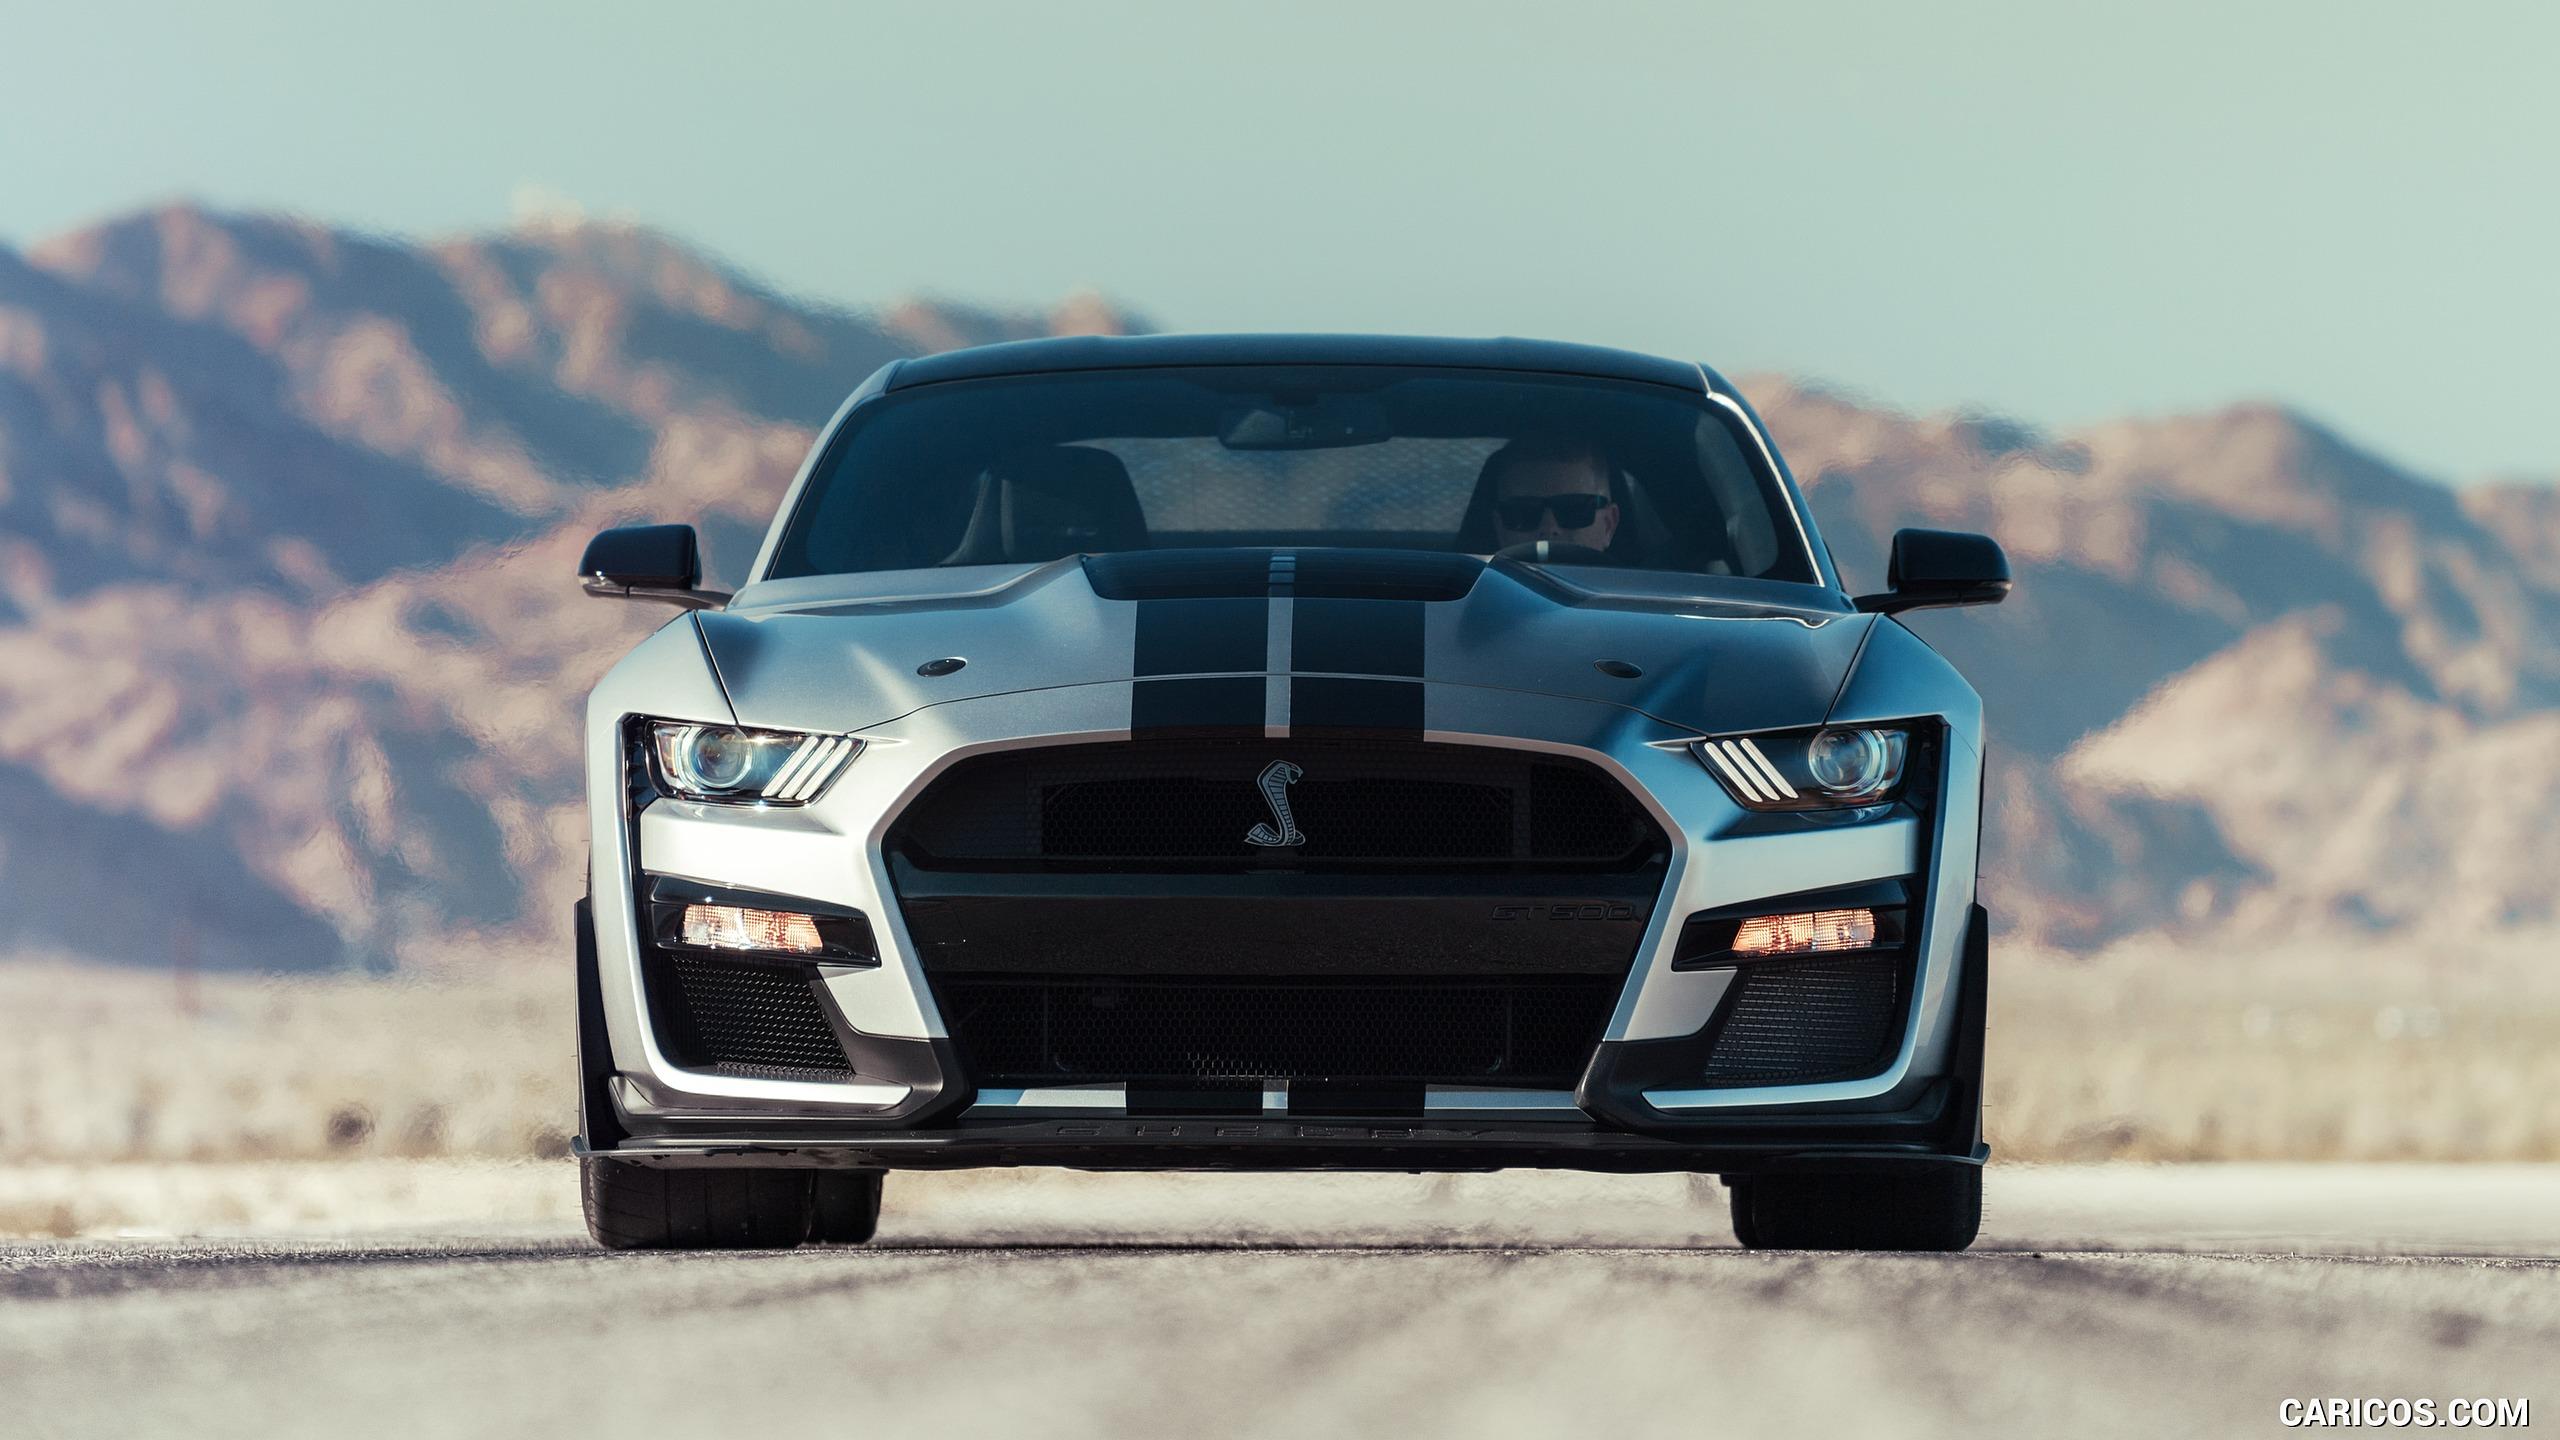 Ford Mustang Shelby GT500. HD Wallpaper